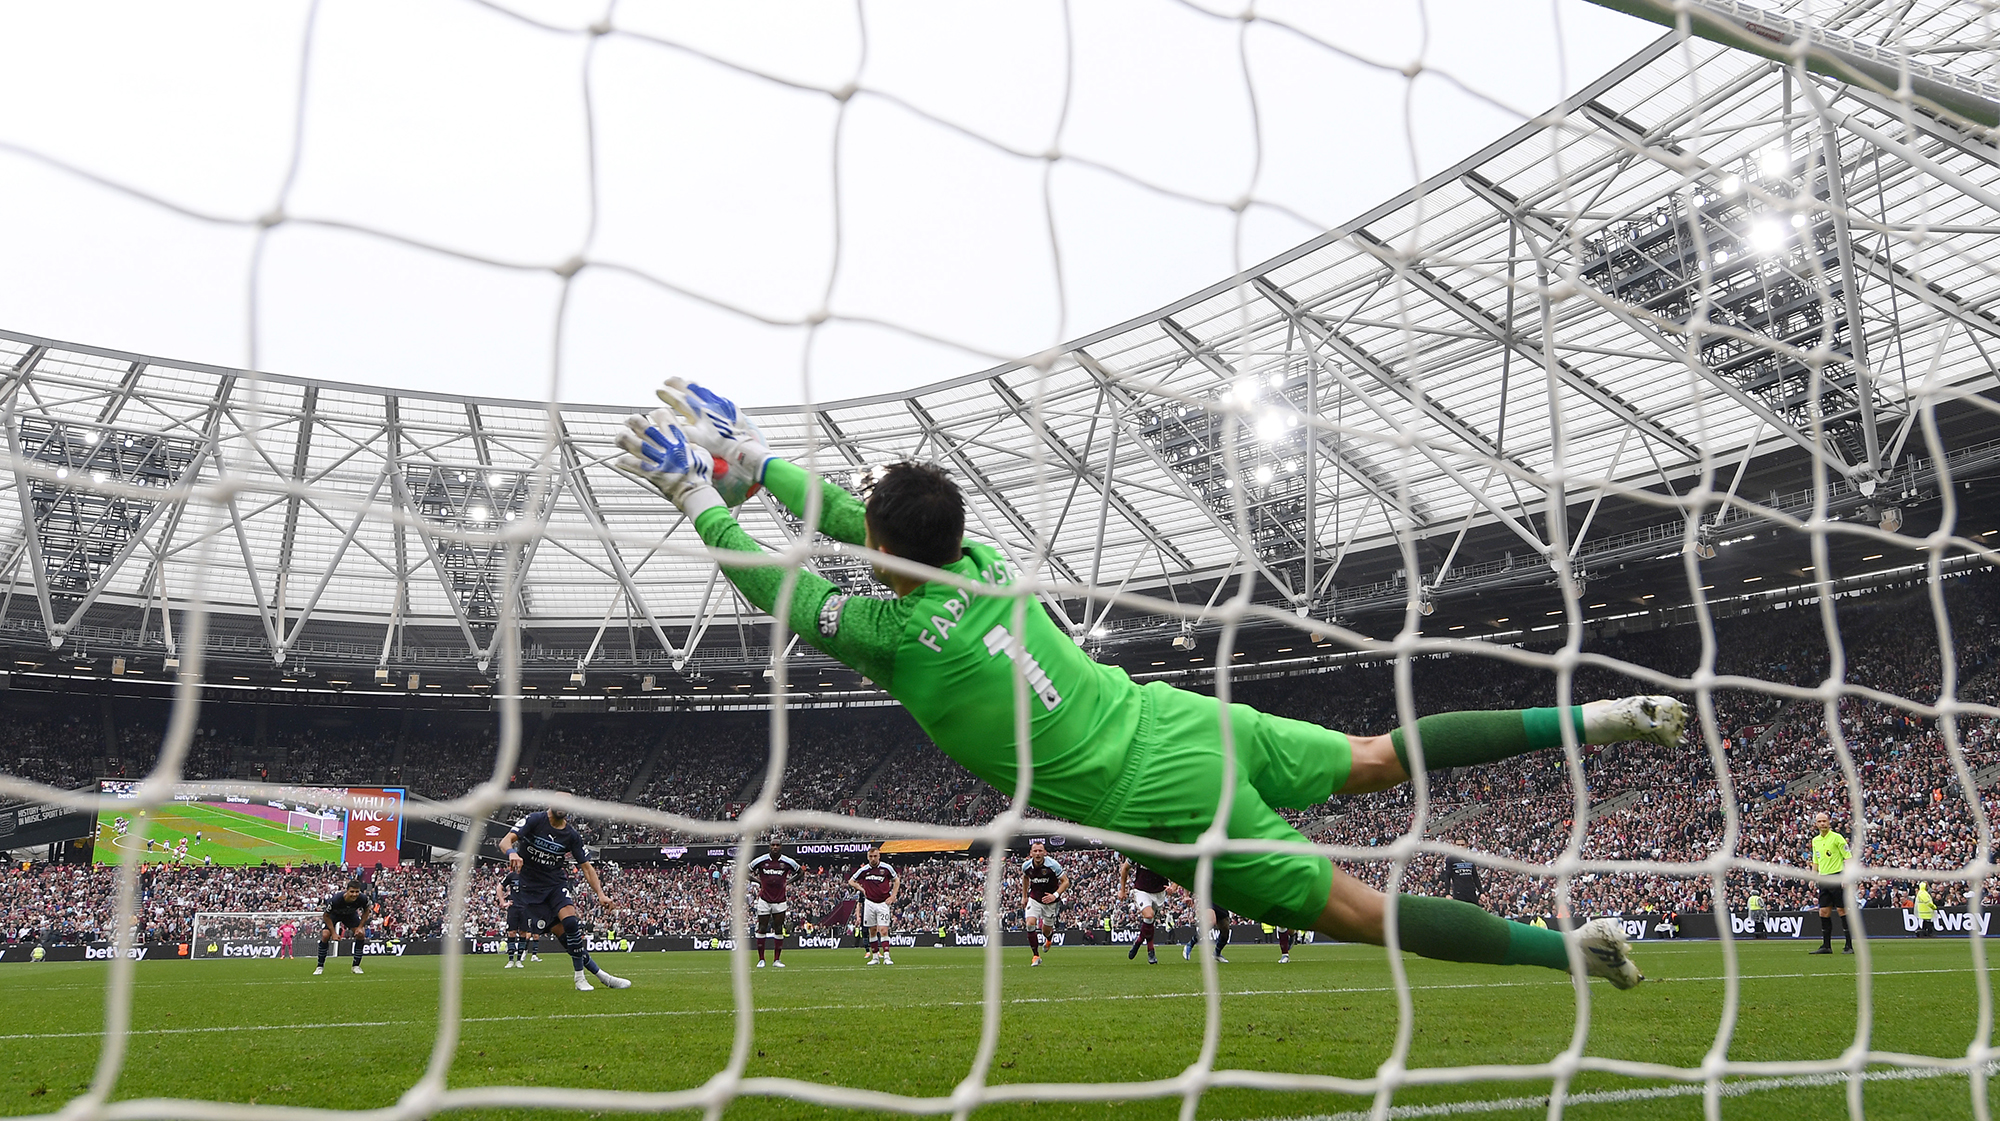 Lukasz Fabianski of West Ham United saves a penalty from Riyad Mahrez of Manchester City during the Premier League match between West Ham United and Manchester City at London Stadium on May 15, 2022 in London, England